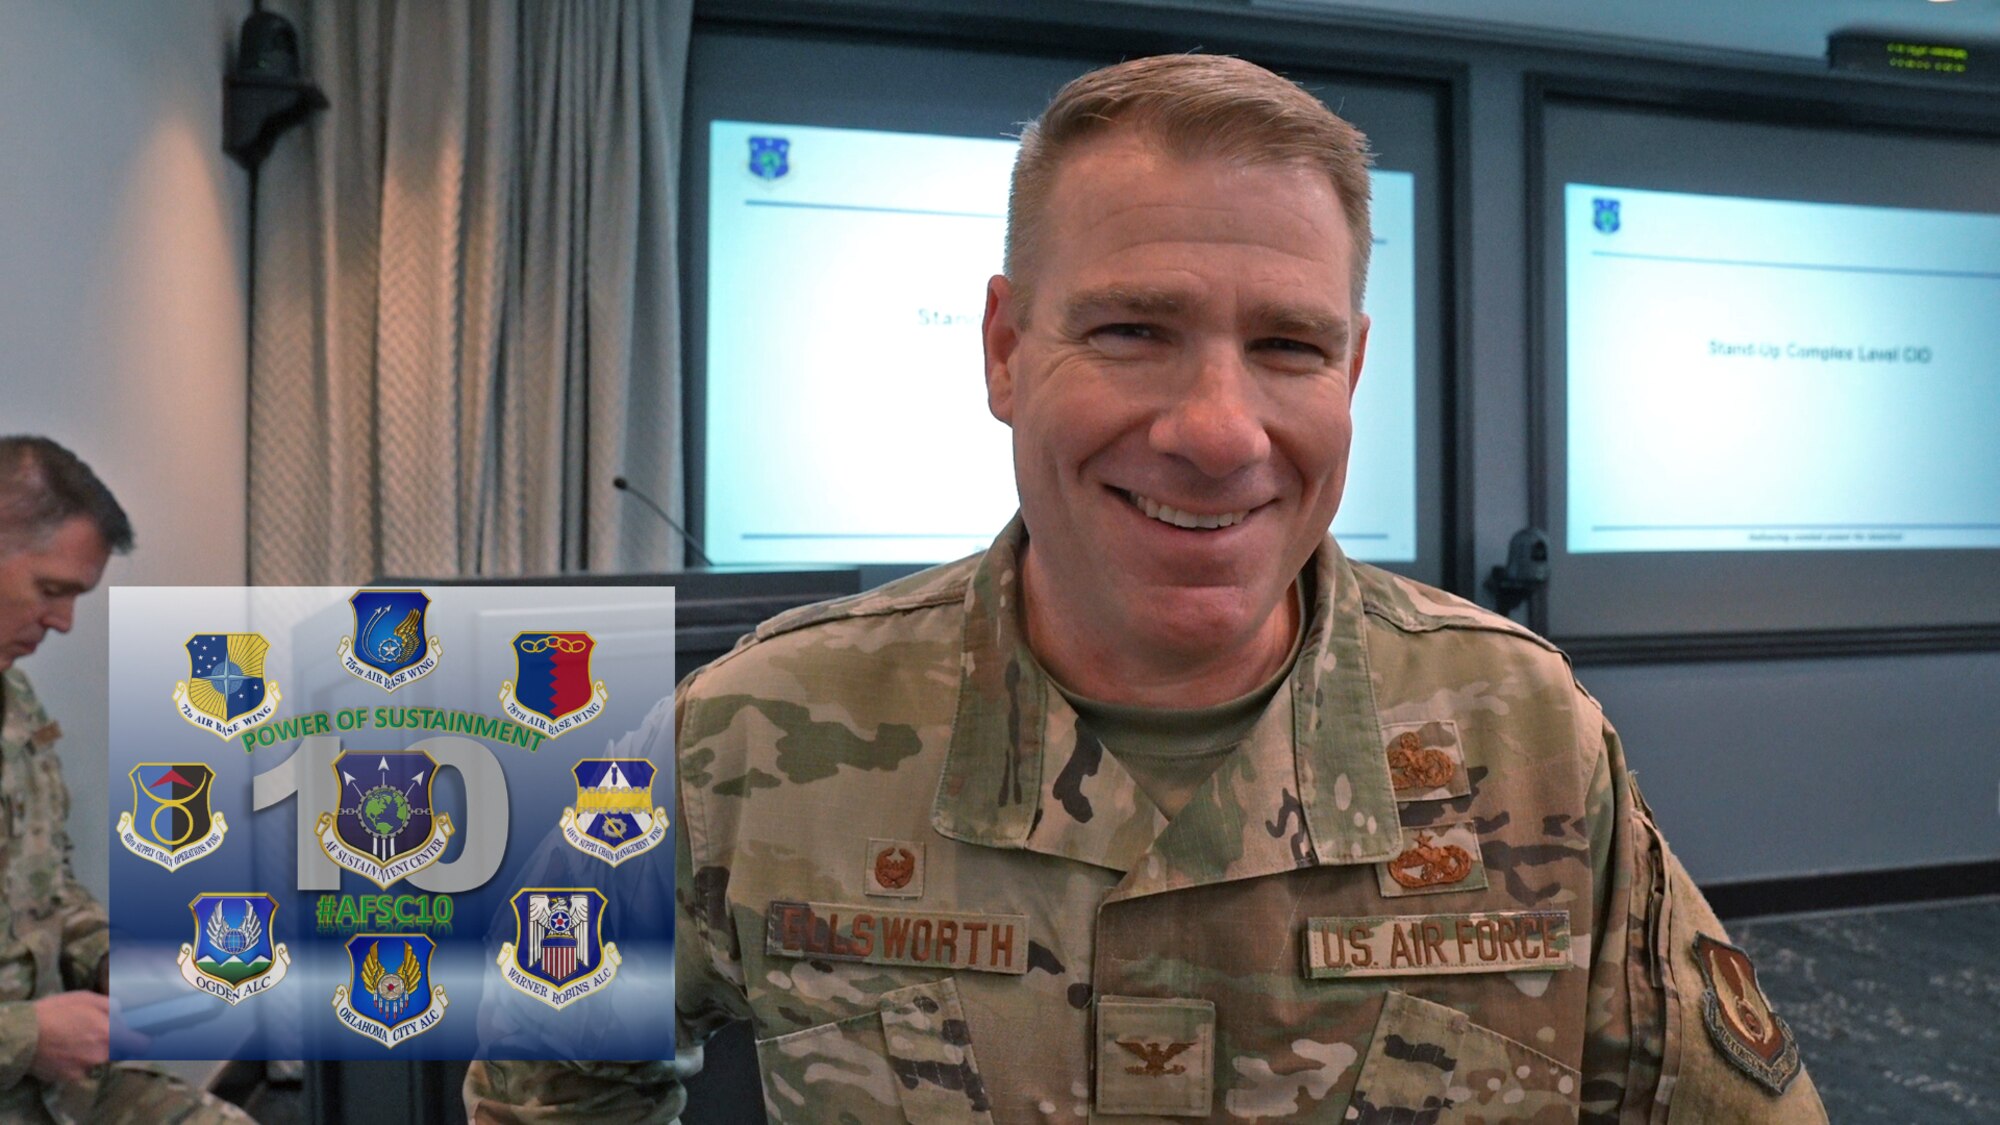 During the AFSC Commander's Summit April 12 and 13, 2022 at Tinker Air Force Base, leaders gave their thoughts about the growth of the Sustainment Center throughout the last 10 years.